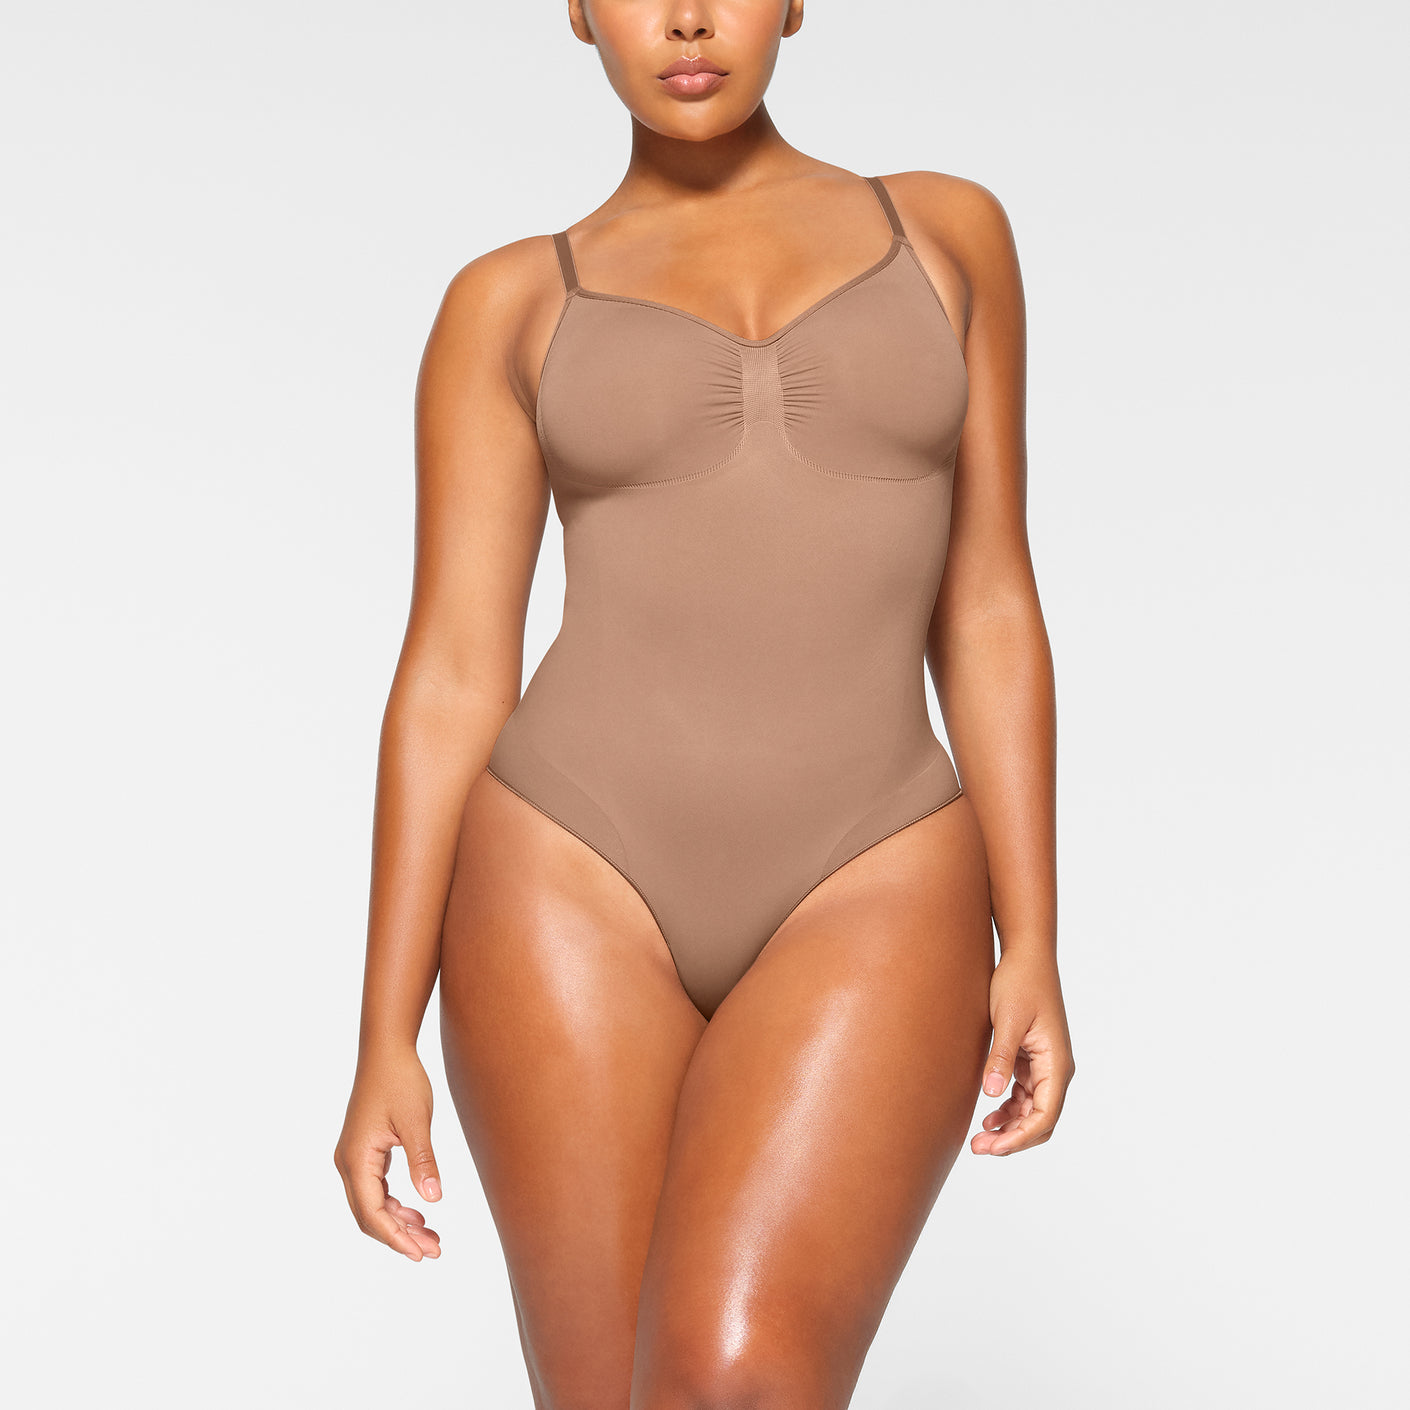 styling my @SKIMS sculpt bodysuit, absolutely love this thing